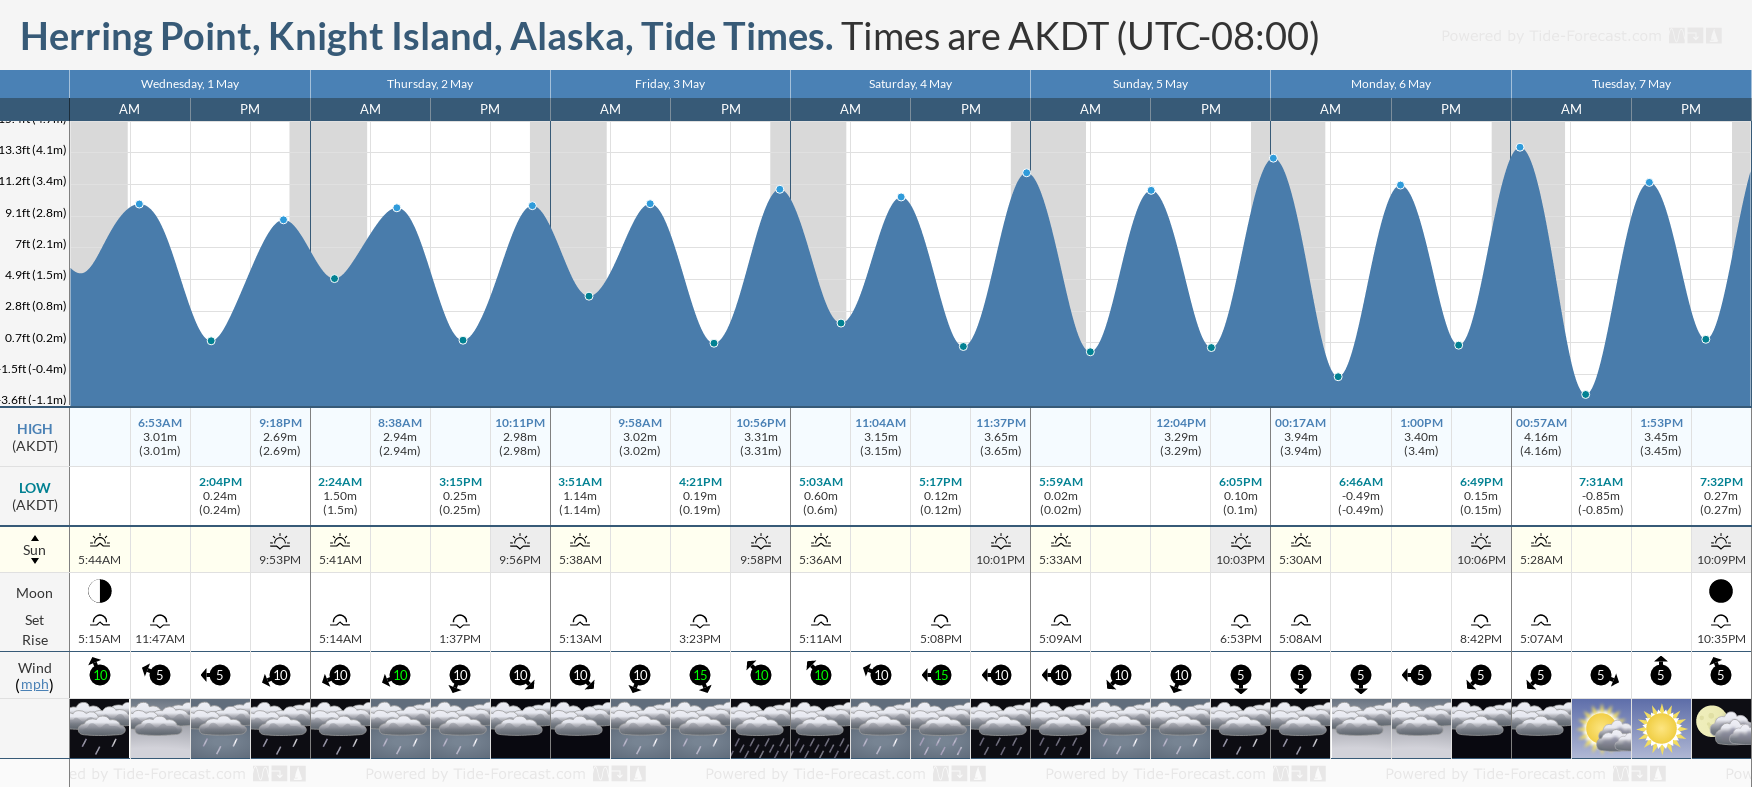 Herring Point, Knight Island, Alaska Tide Chart including high and low tide tide times for the next 7 days